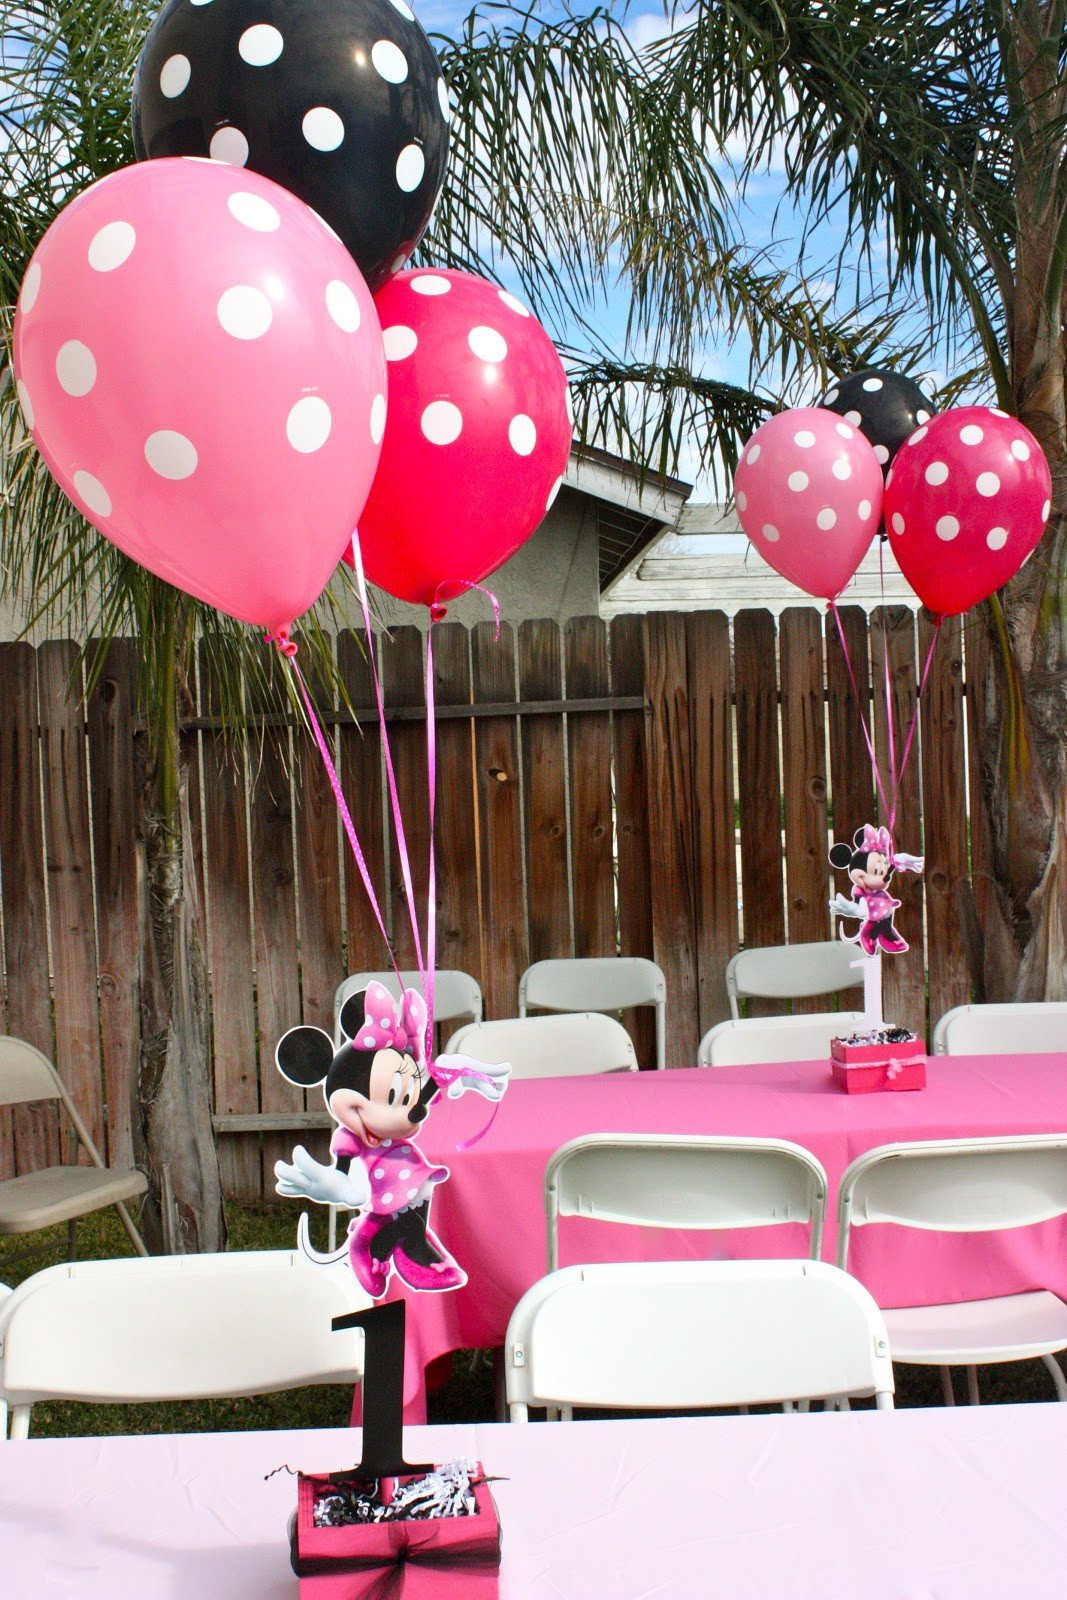 Minnie Mouse Birthday Decorations
 tini Sophia s 1st Birthday Minnie Mouse Party